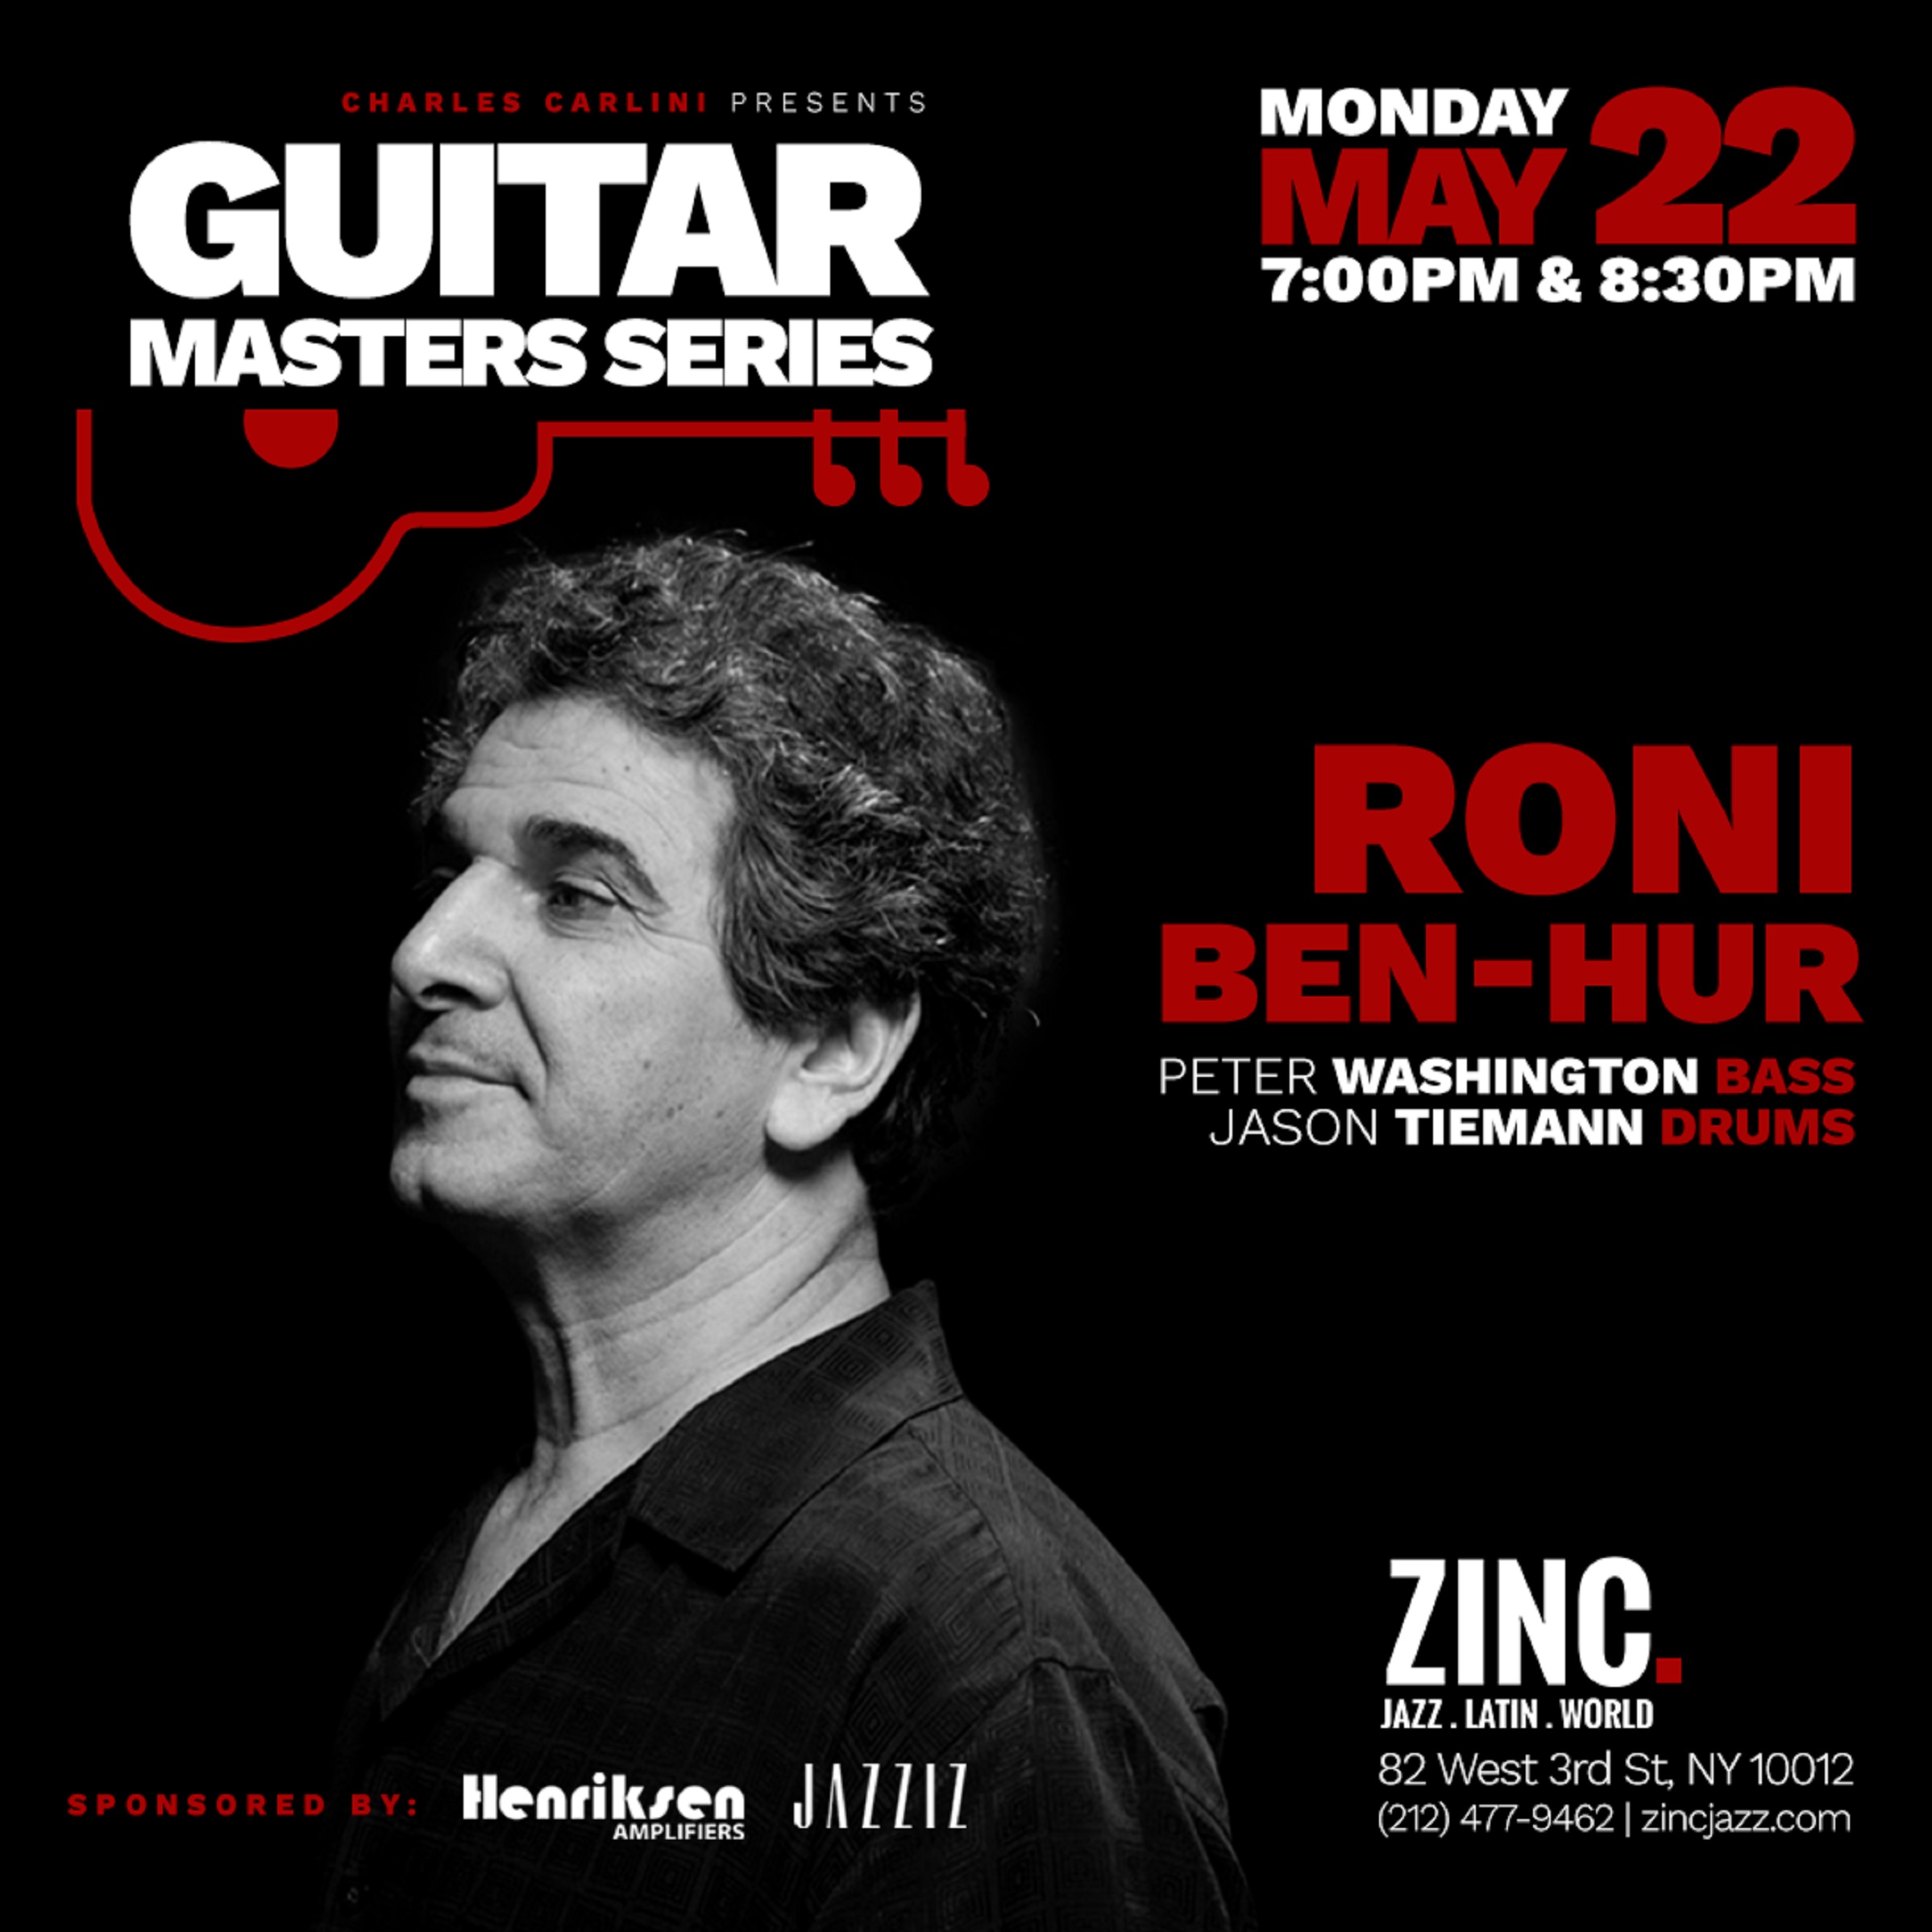 Acclaimed Jazz Guitarist Roni Ben-Hur returns to Zinc by Popular Demand on Monday, May 22